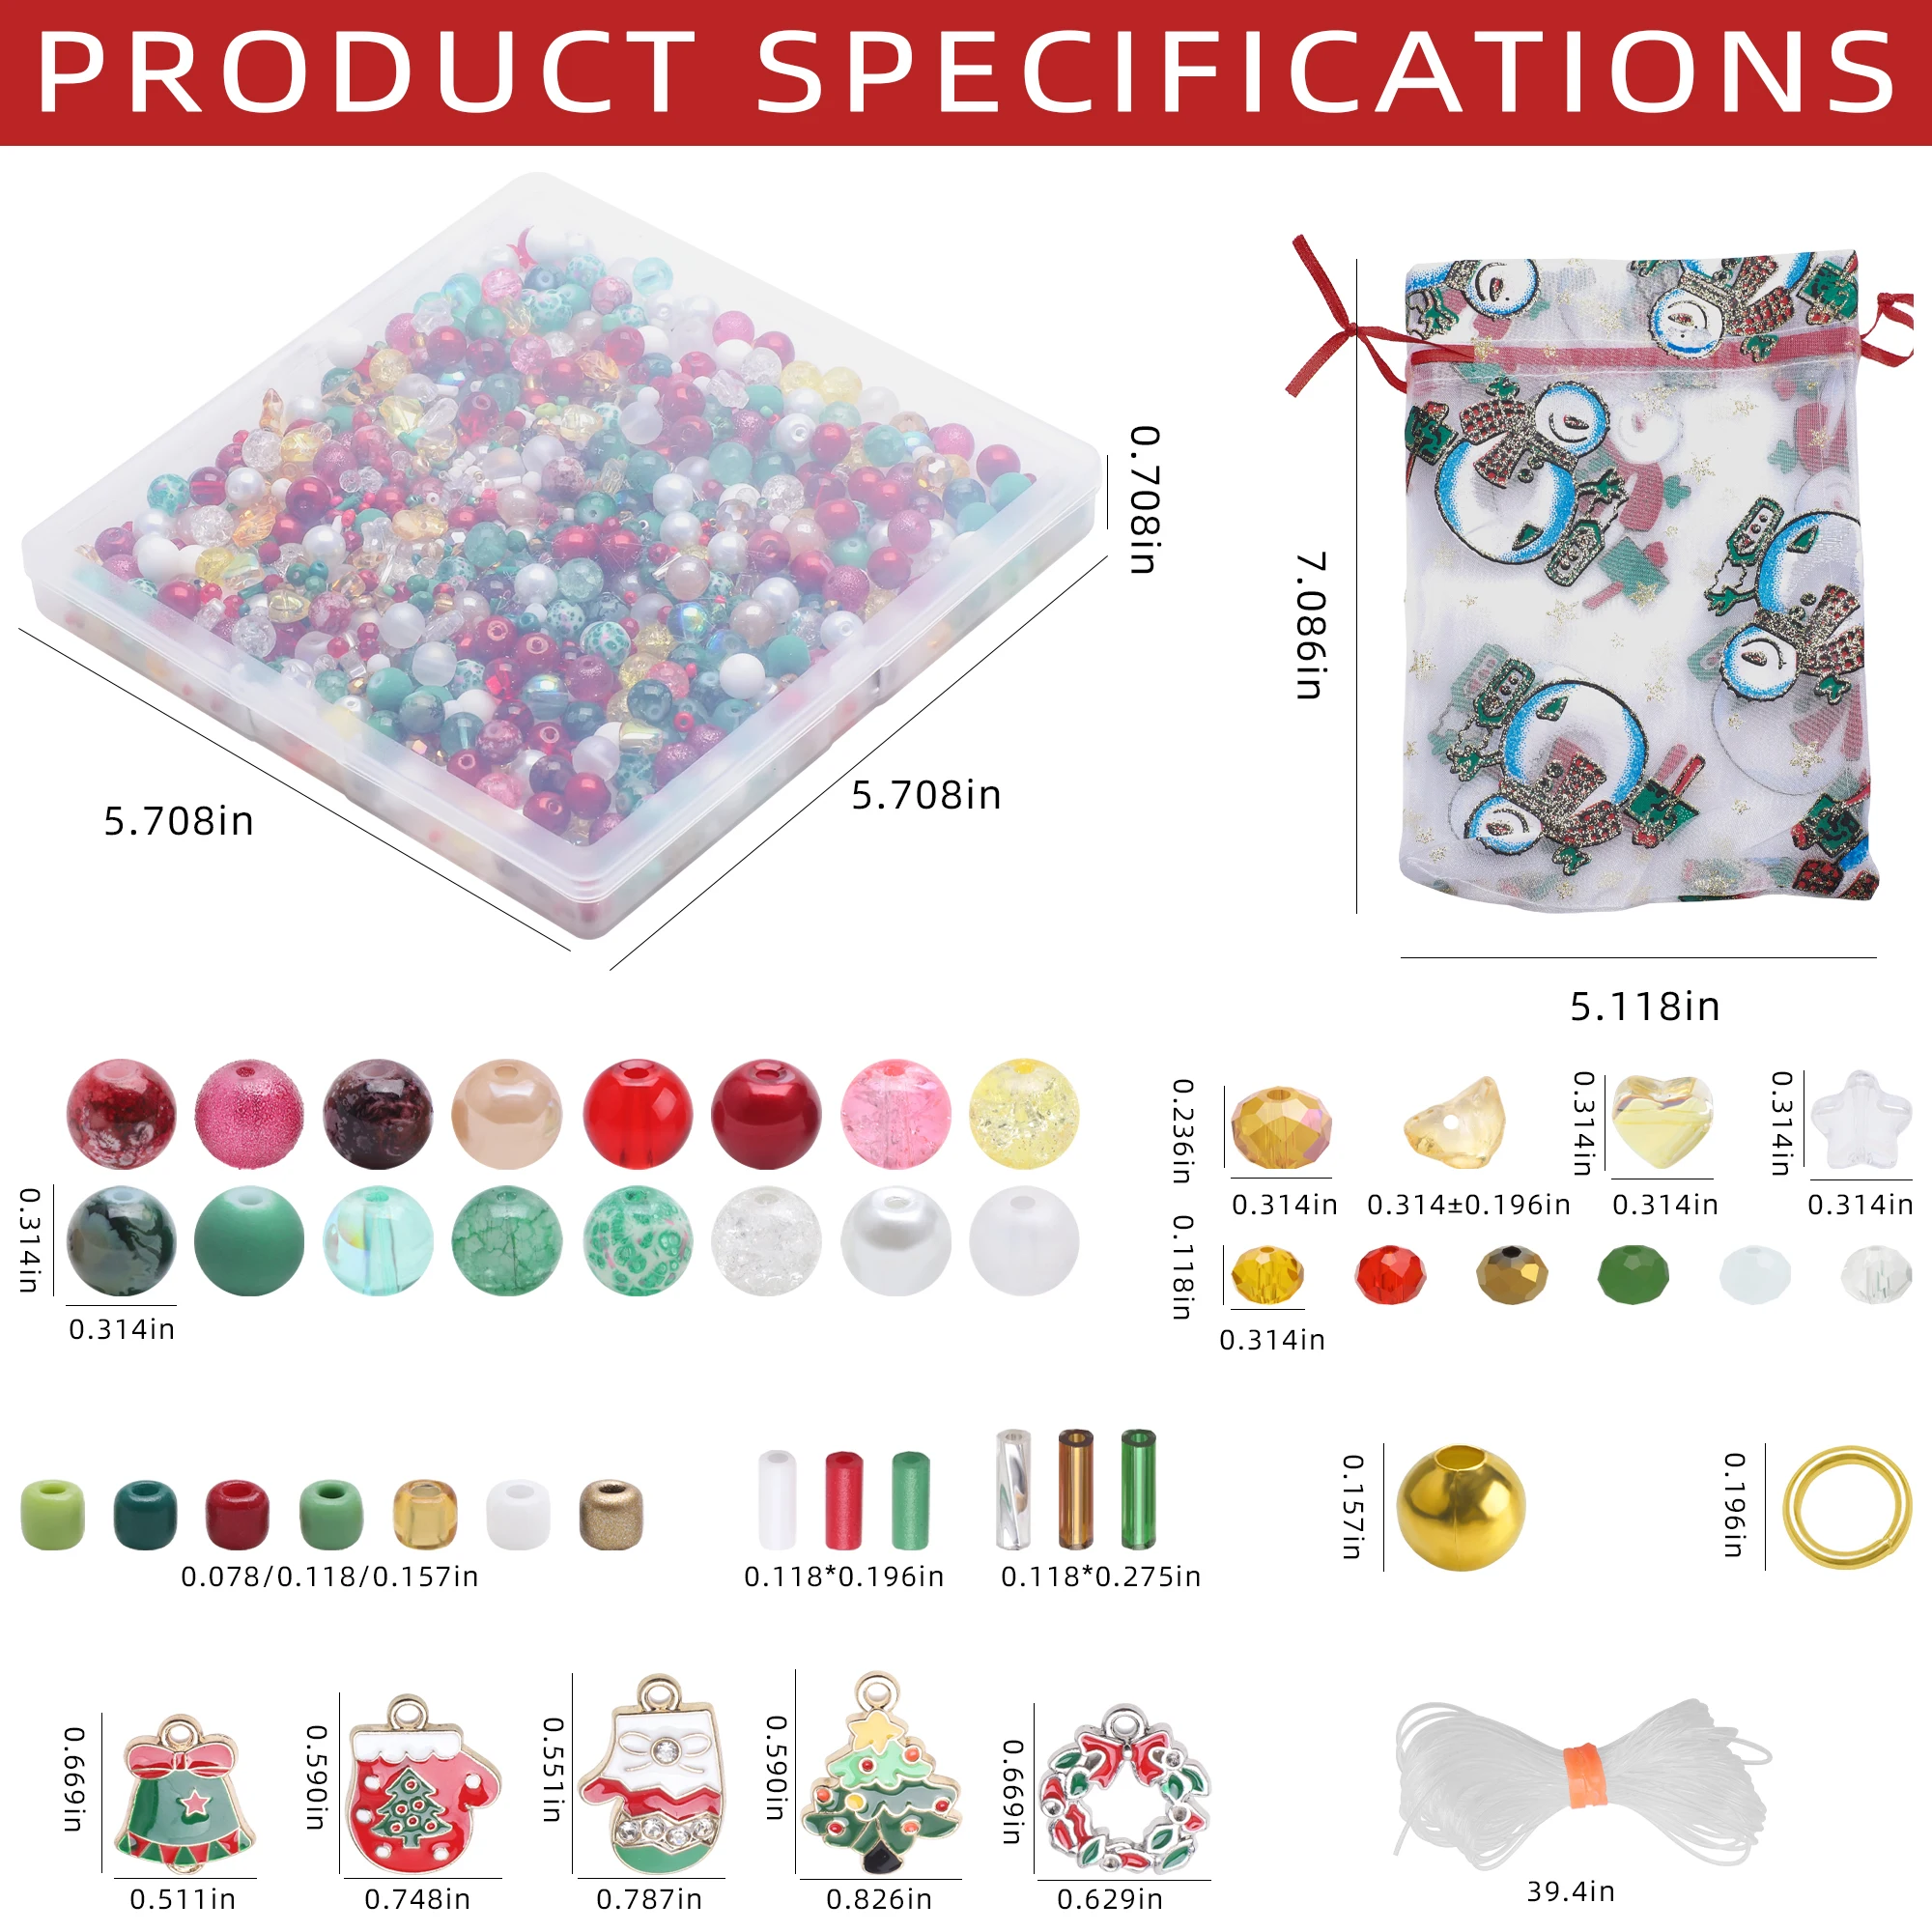 8mm Round Glass Beads for Jewelry Making Round Bead 200 pcs Specialty Mix